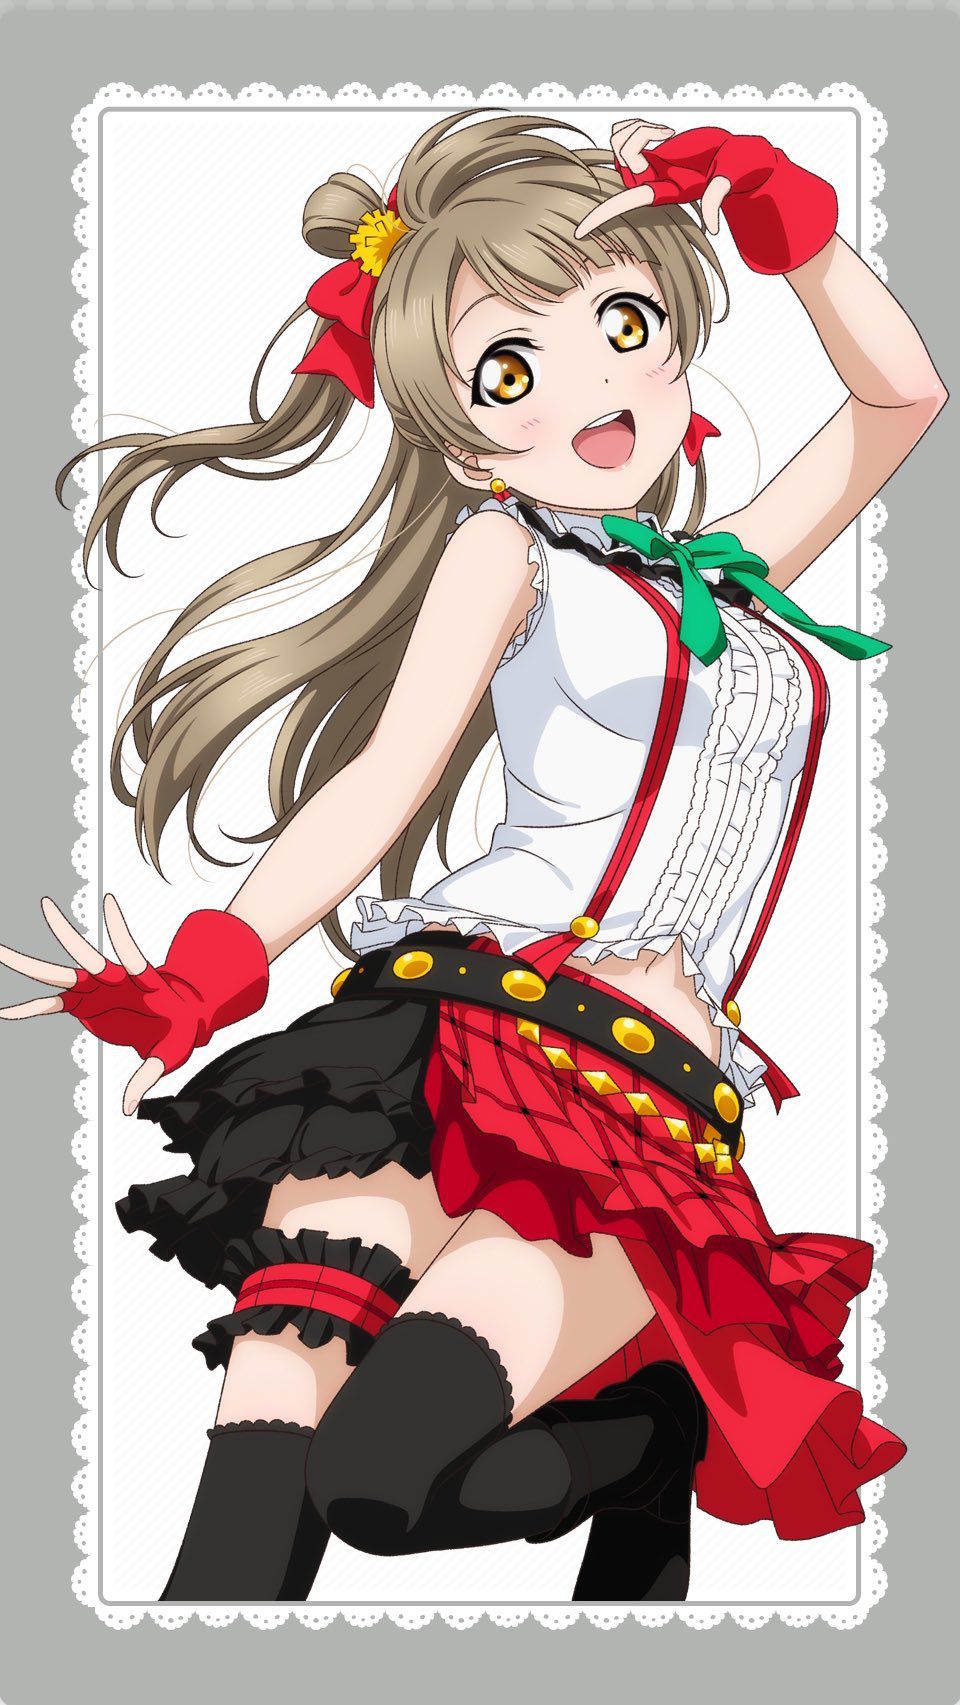 【With images】 The most erotic and syco character in the love live series wwwwwww 1